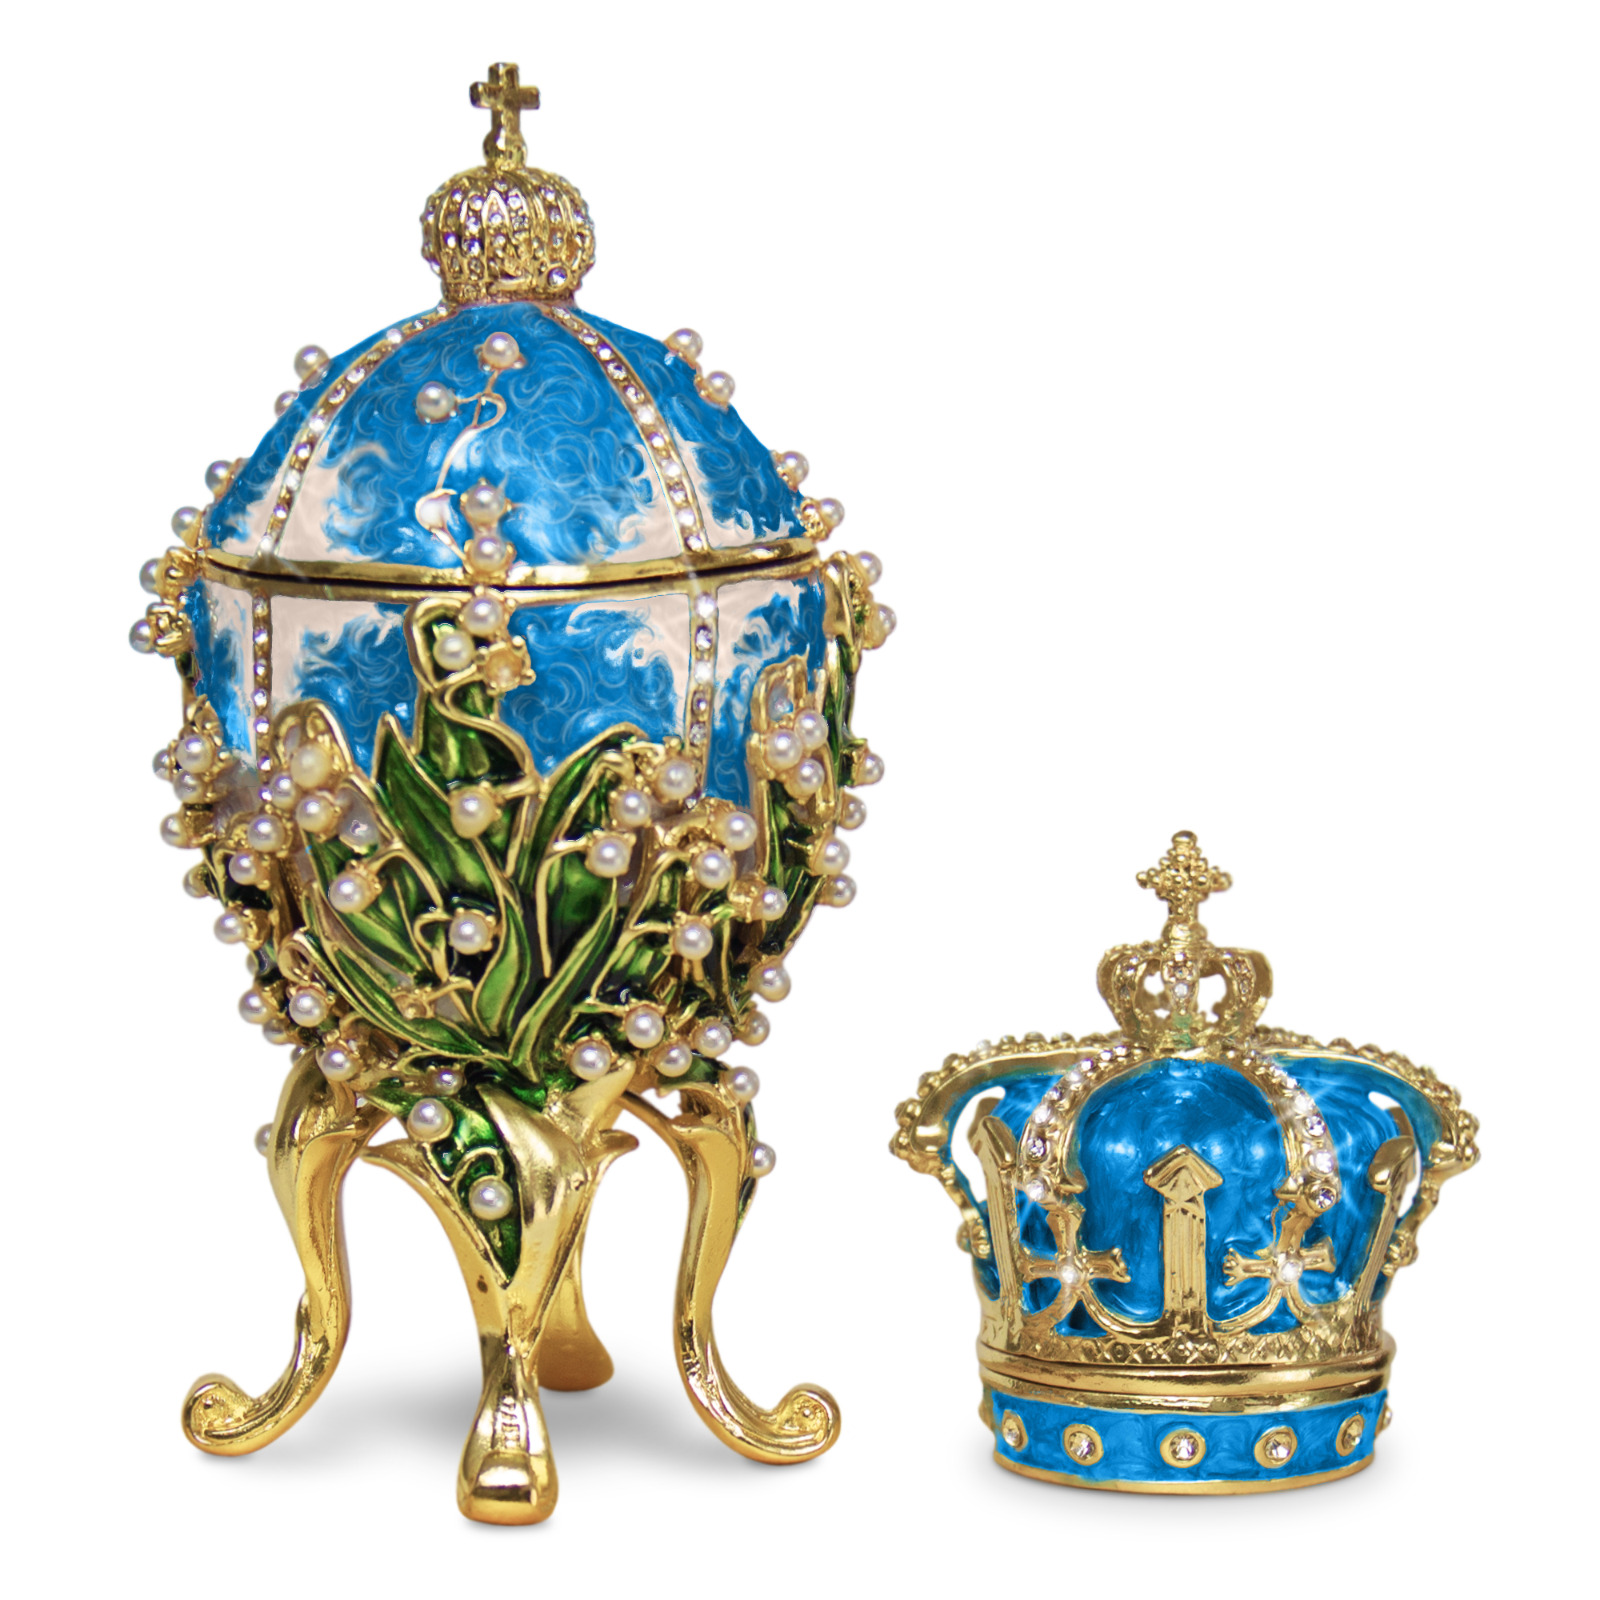 Blue Lilies of the Valley Faberge Egg Replica Extra Large 5.9 inch + Crown